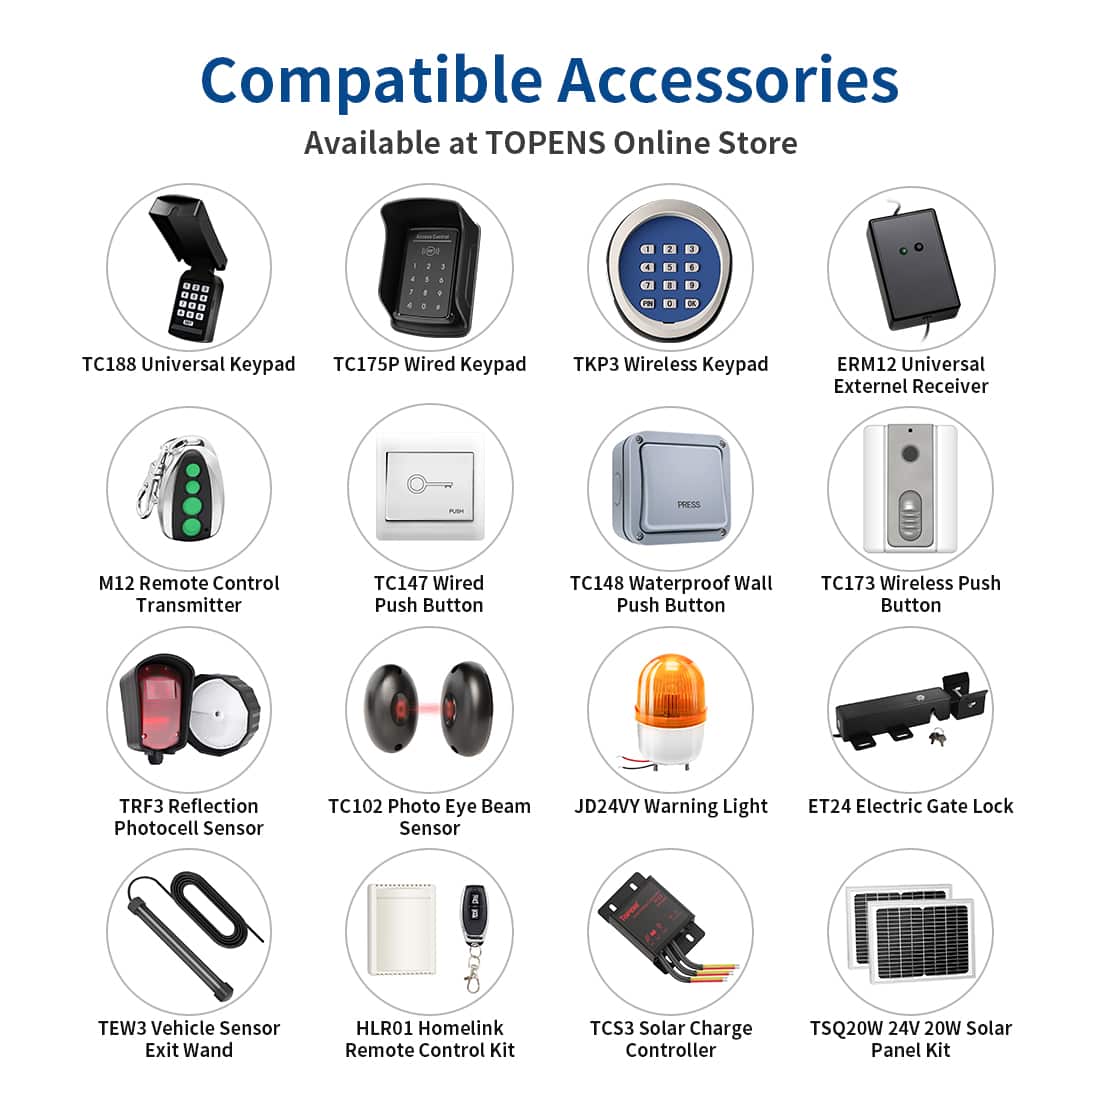 TOPENS Various Online Accessories